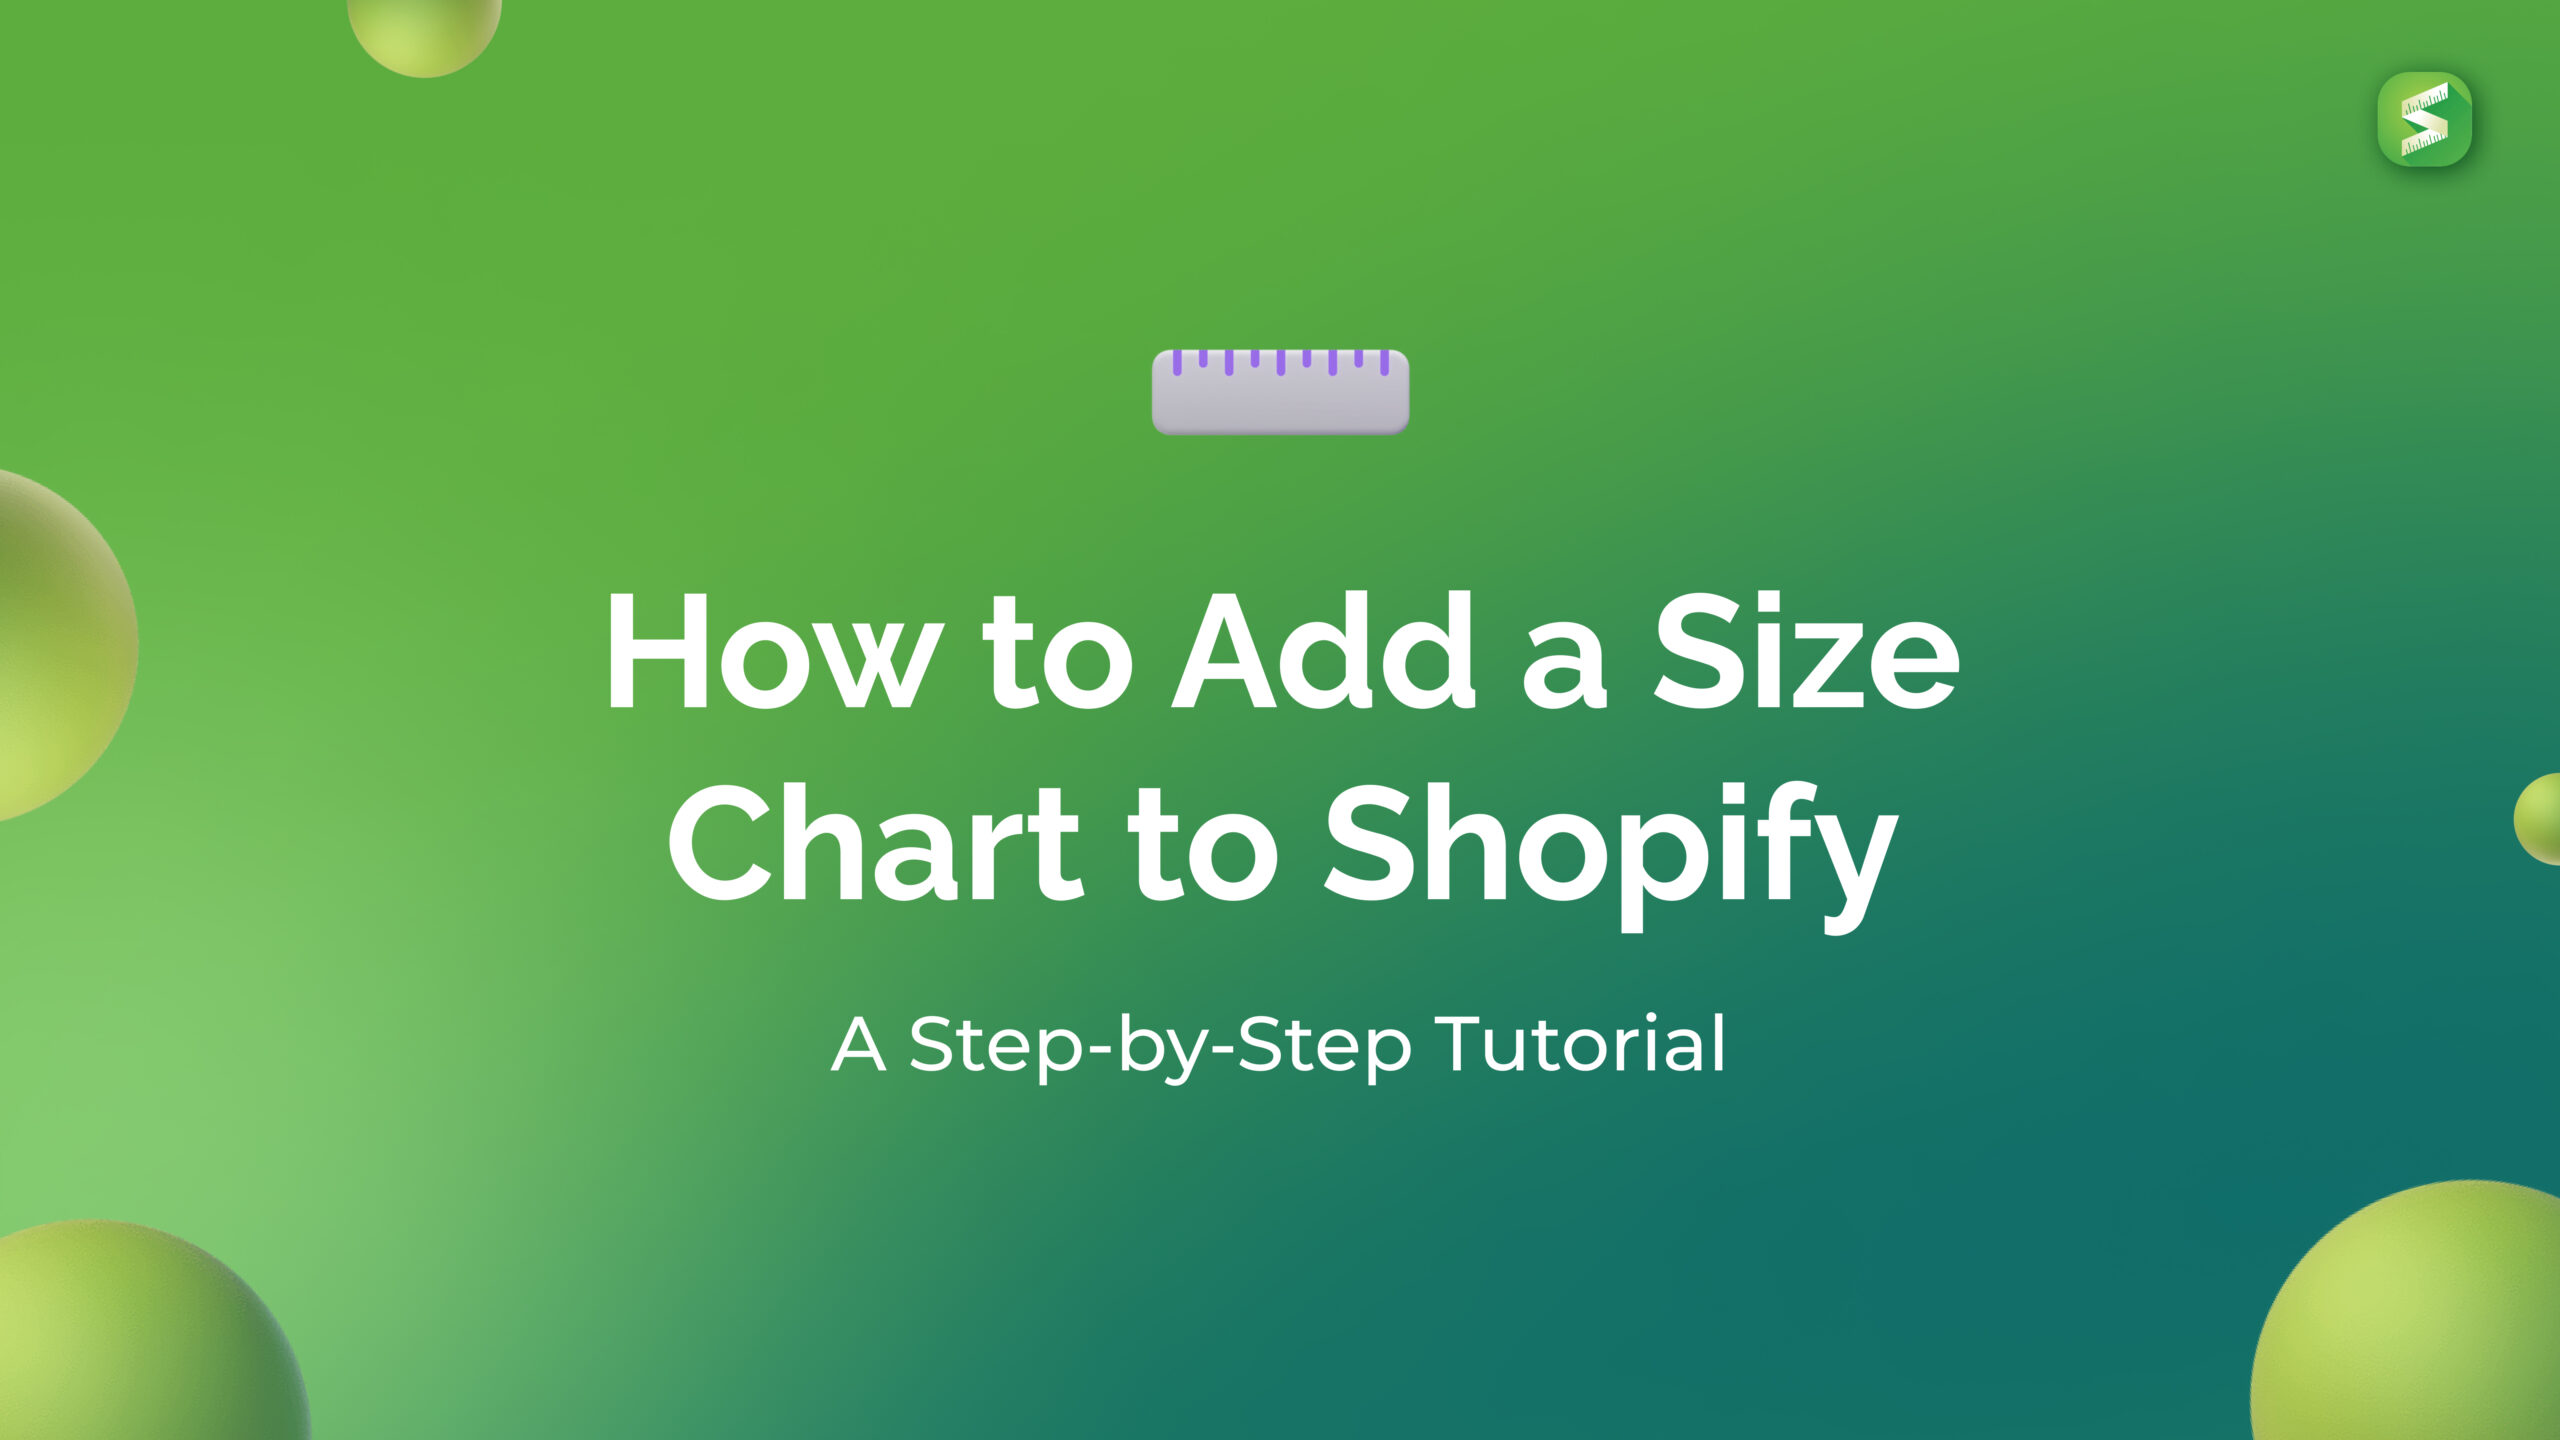 shopify sizing chart tutoral - How to add shopify size chart